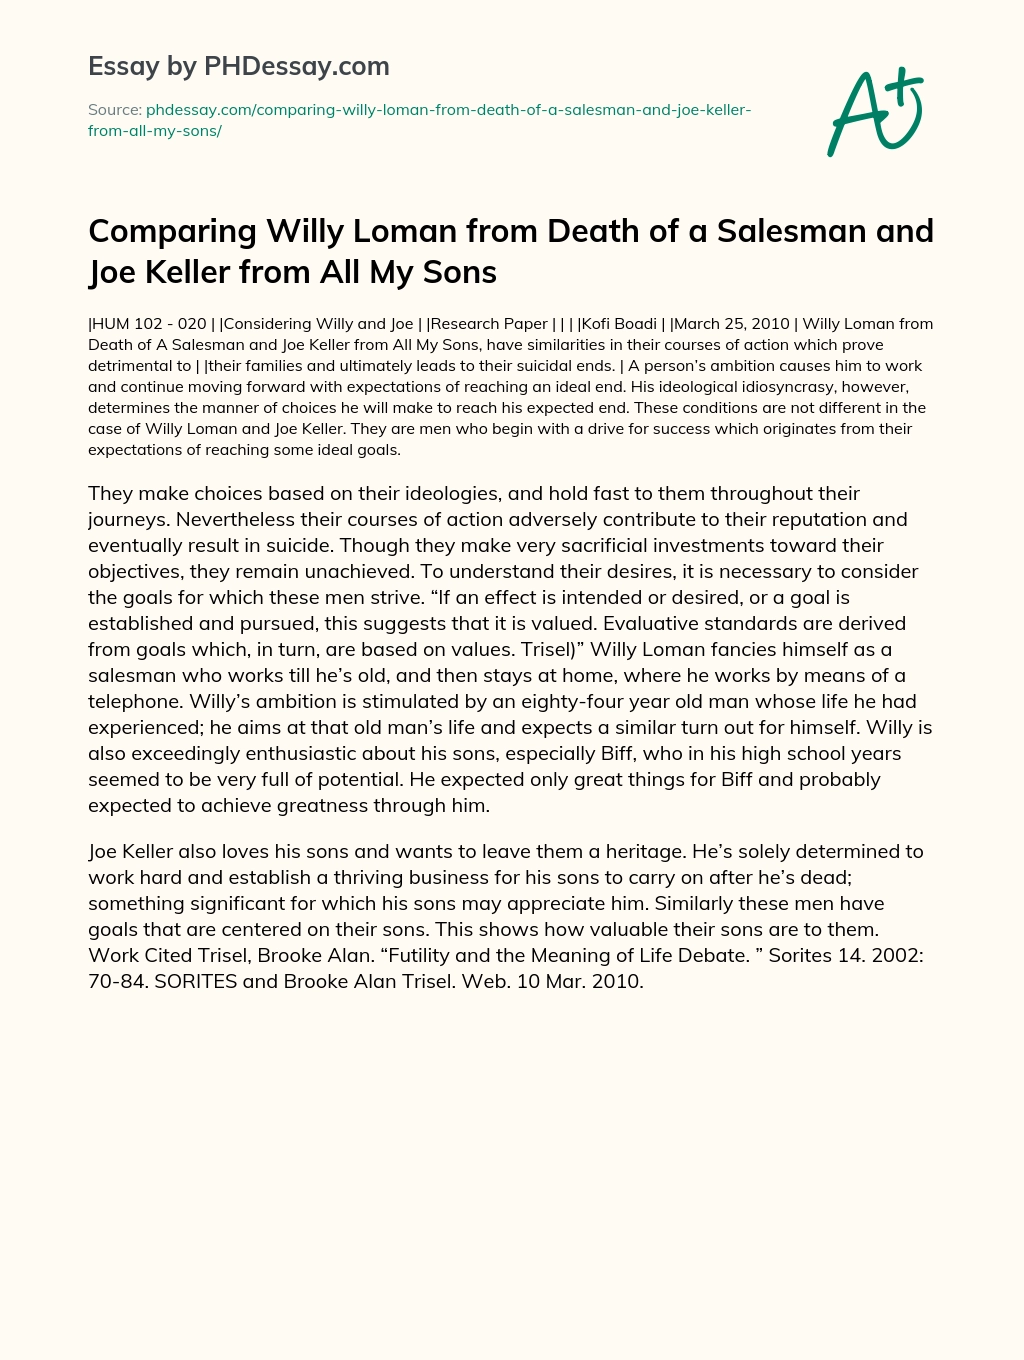 Comparing Willy Loman from Death of a Salesman and Joe Keller from All My Sons essay